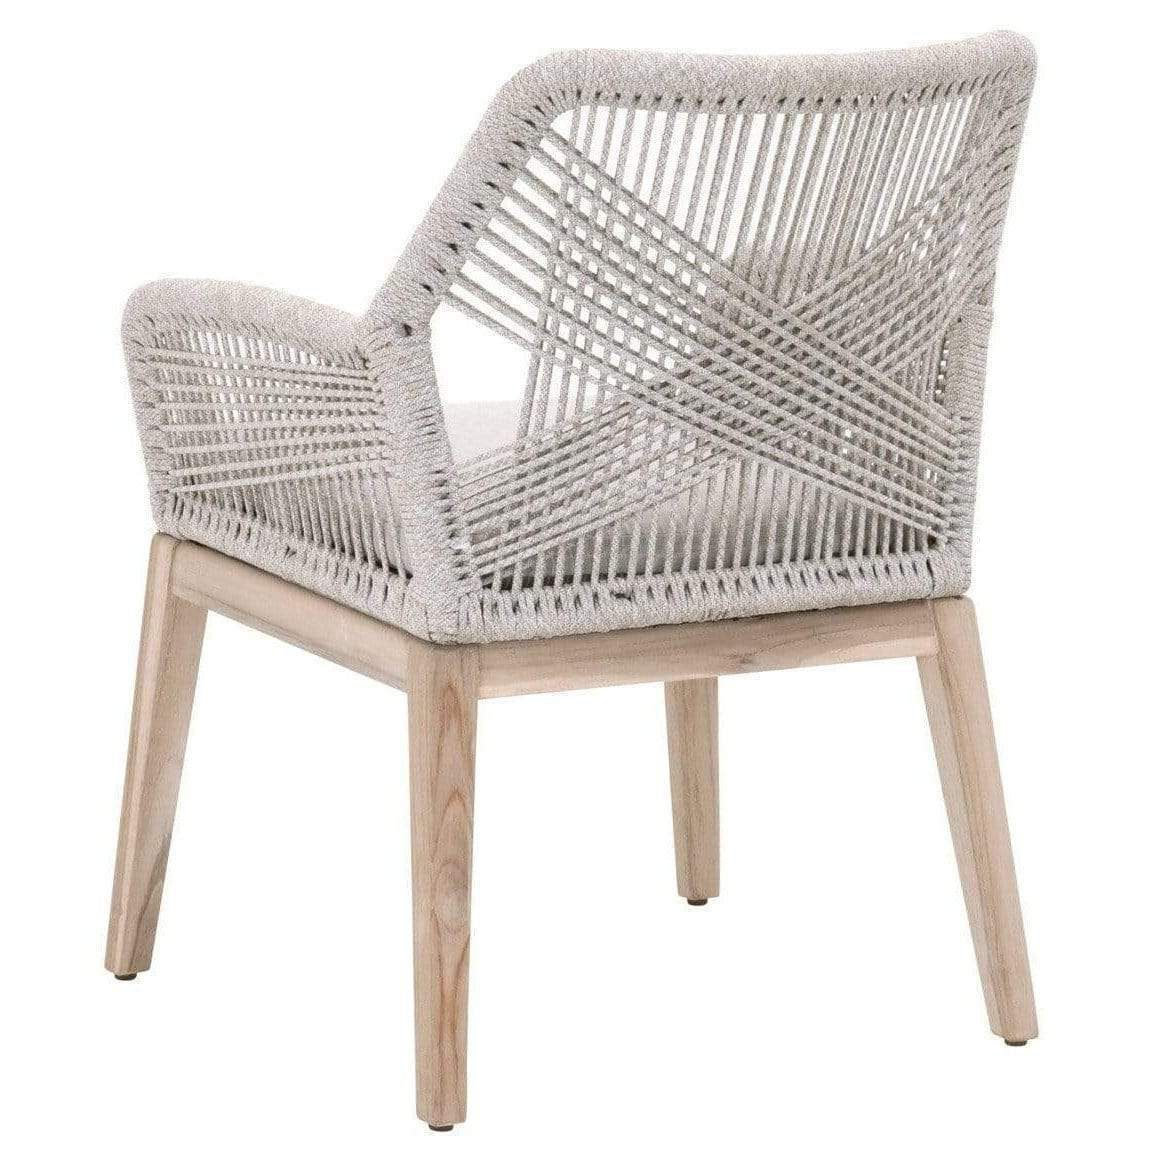 BLU Home Loom Outdoor Arm Chair - Taupe & White (Set of 2) Furniture orient-express-6809KD.WTA/PUM/GT